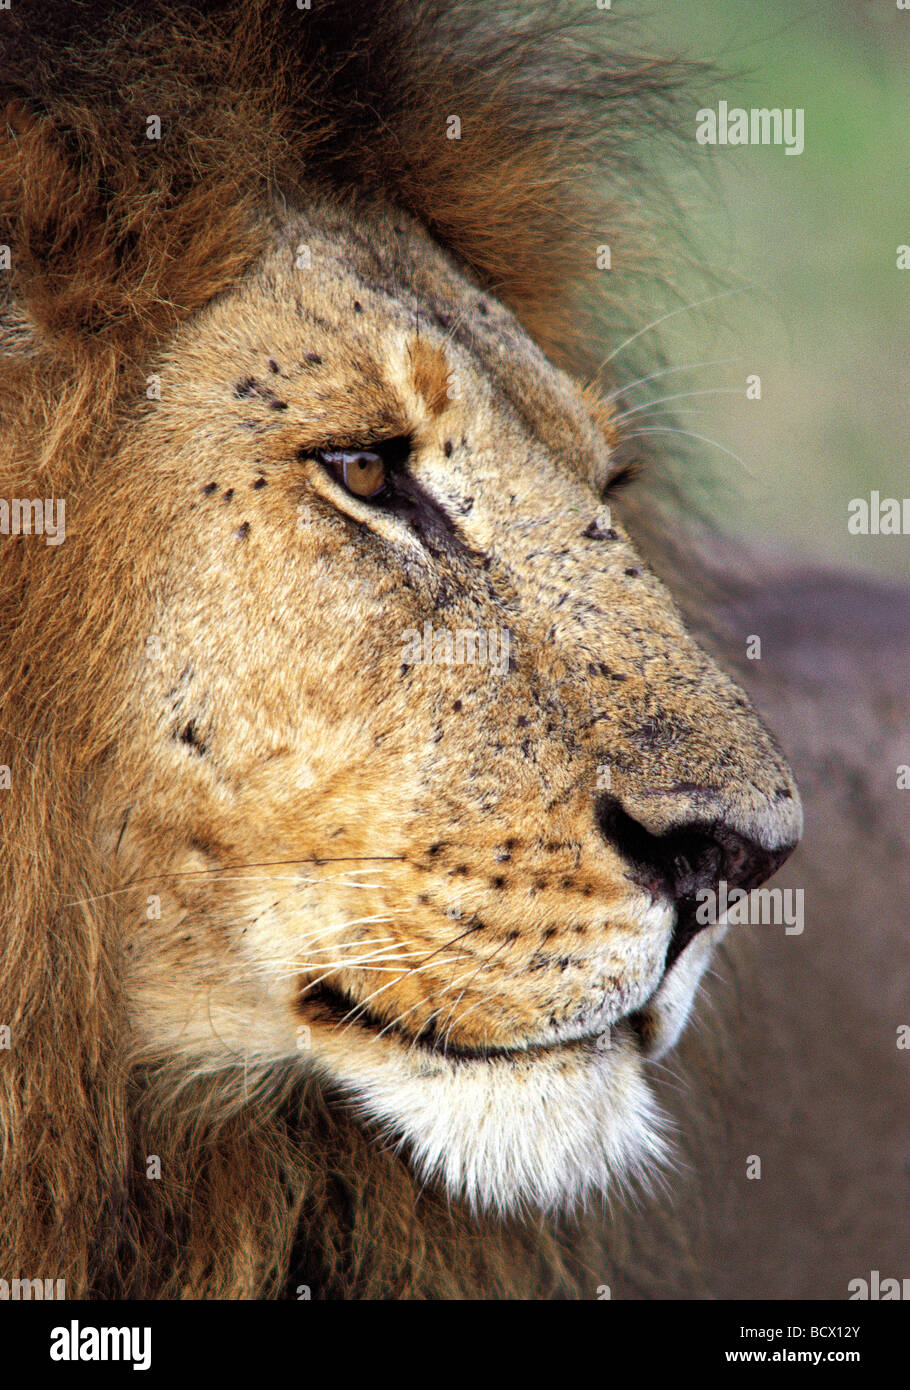 Close up portrait profile of male Lion showing flies and ticks on his face Masai Mara National Reserve Kenya East Africa Stock Photo